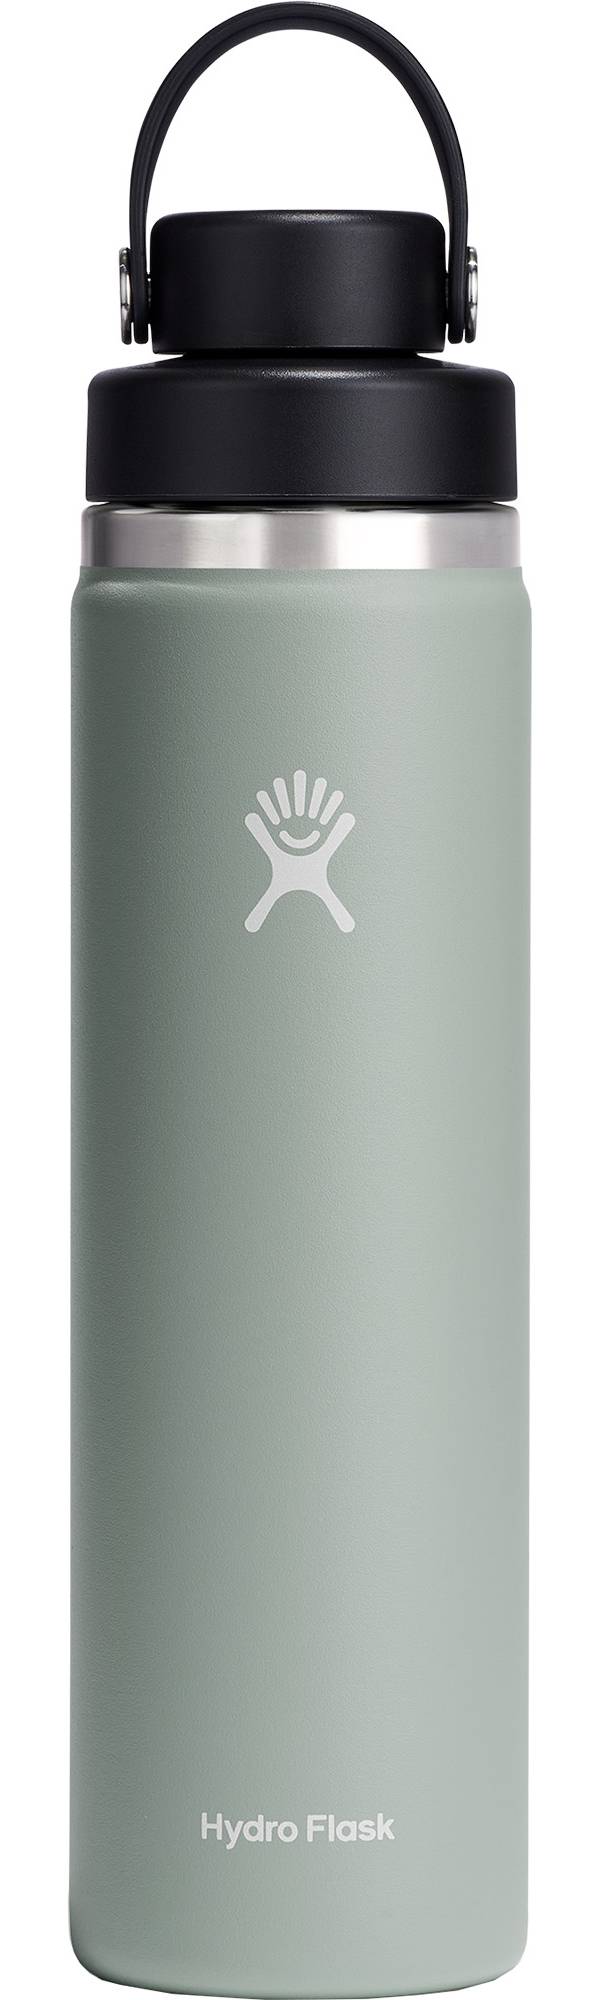 Hydro Flask 24 oz. Wide Mouth Bottle with Flex Chug Cap product image